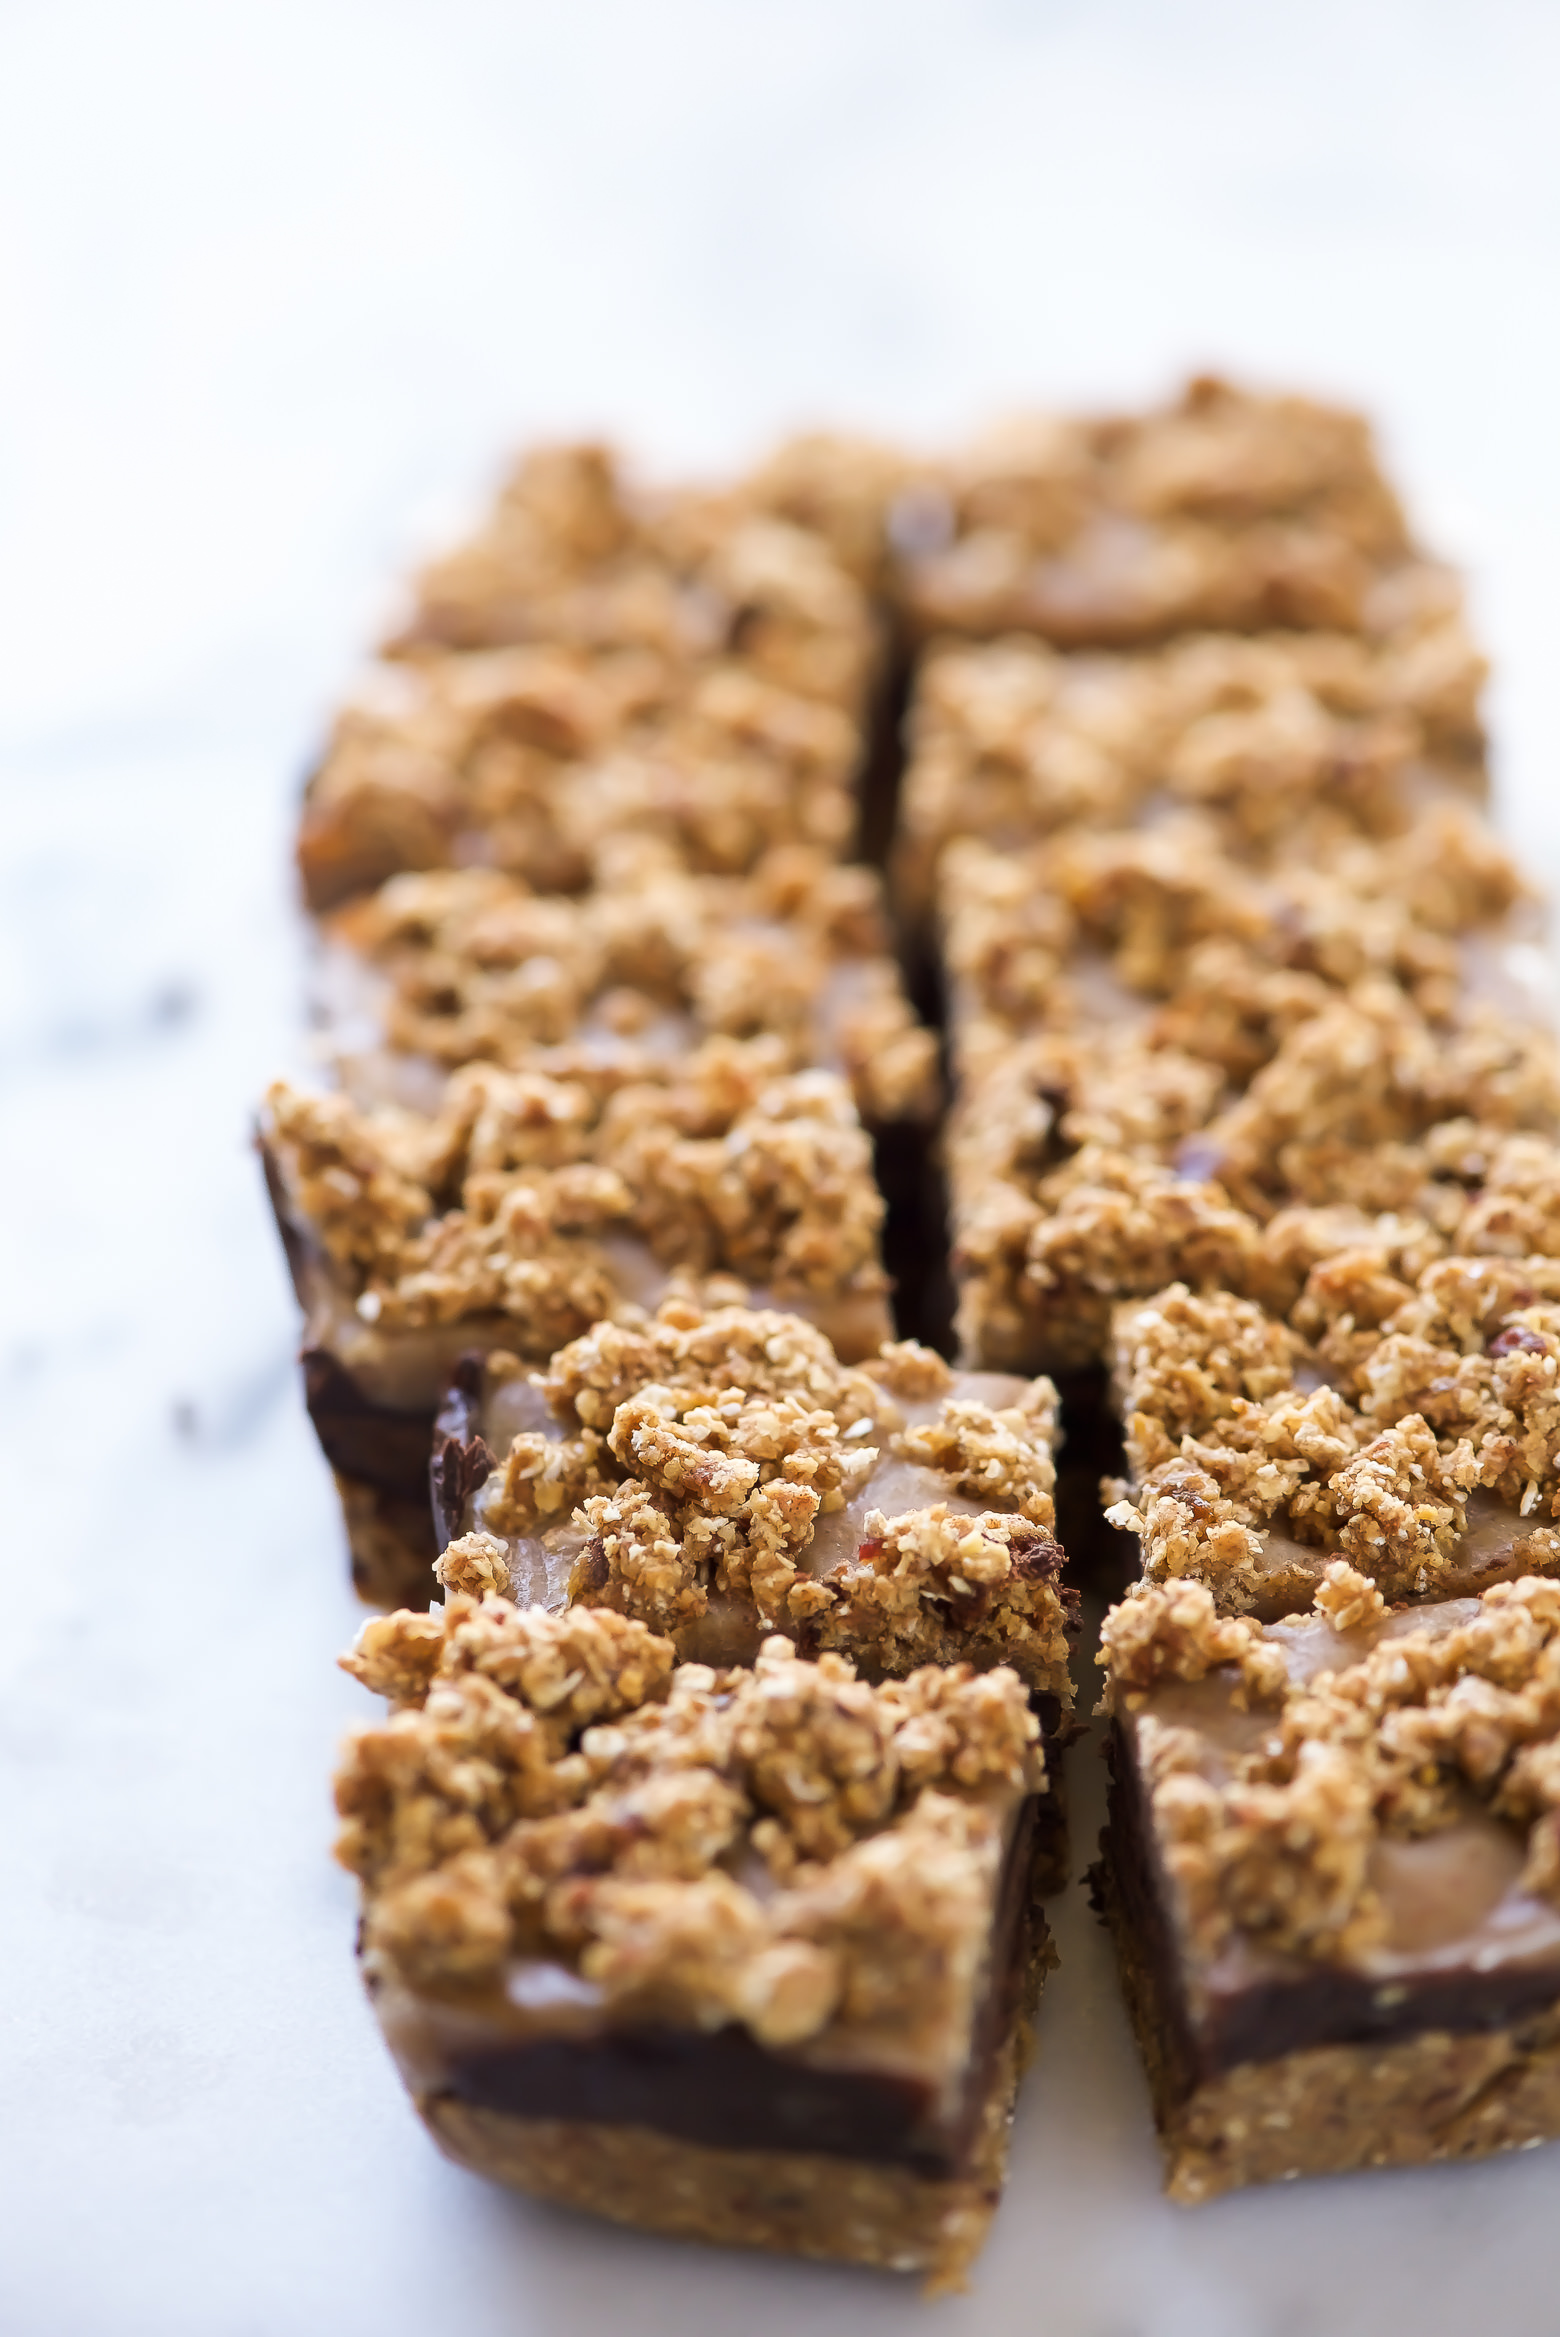 These No Bake Salted Caramel Chocolate Oat Bars come together with only 9 wholesome ingredients and are refined sugar-free! They have a cookie dough-like crust, fudge chocolate, salted caramel and sprinkled with sea salt, all for only 150 calories!